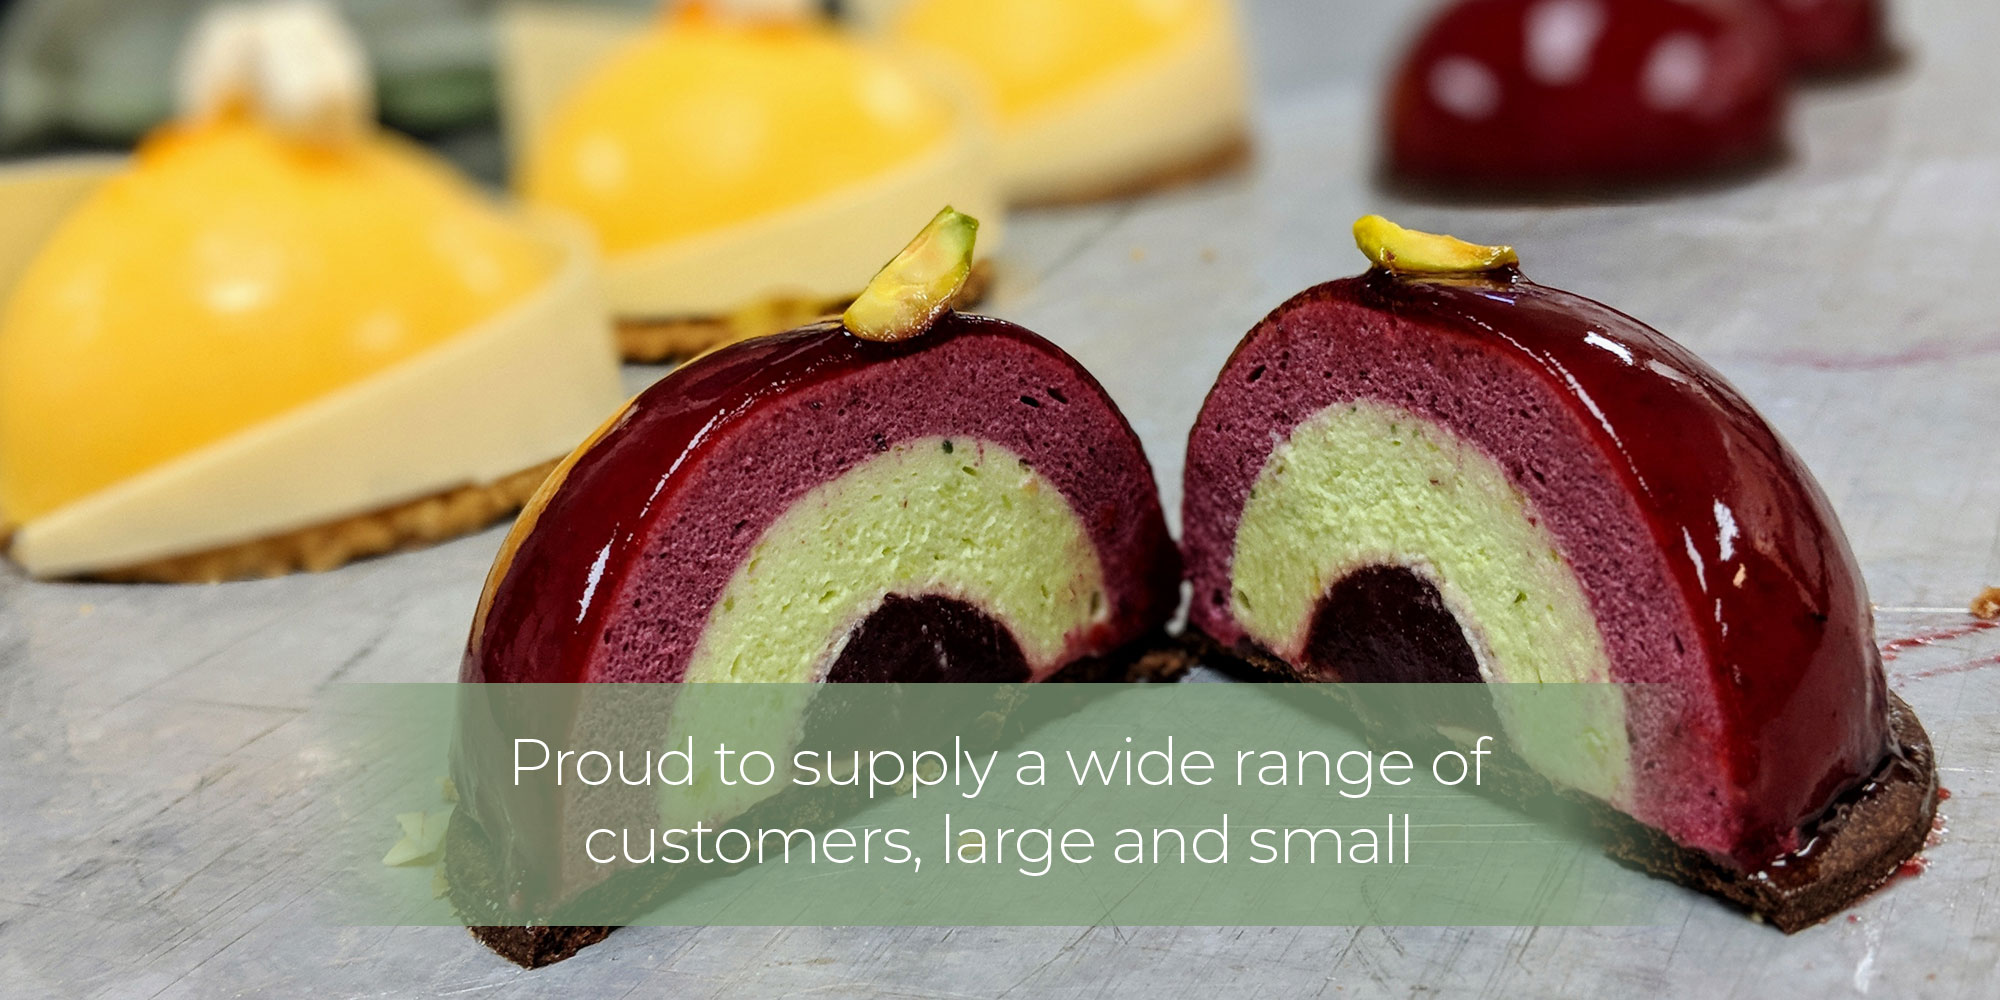 Proud to supply a wide range ofcustomers, large and small